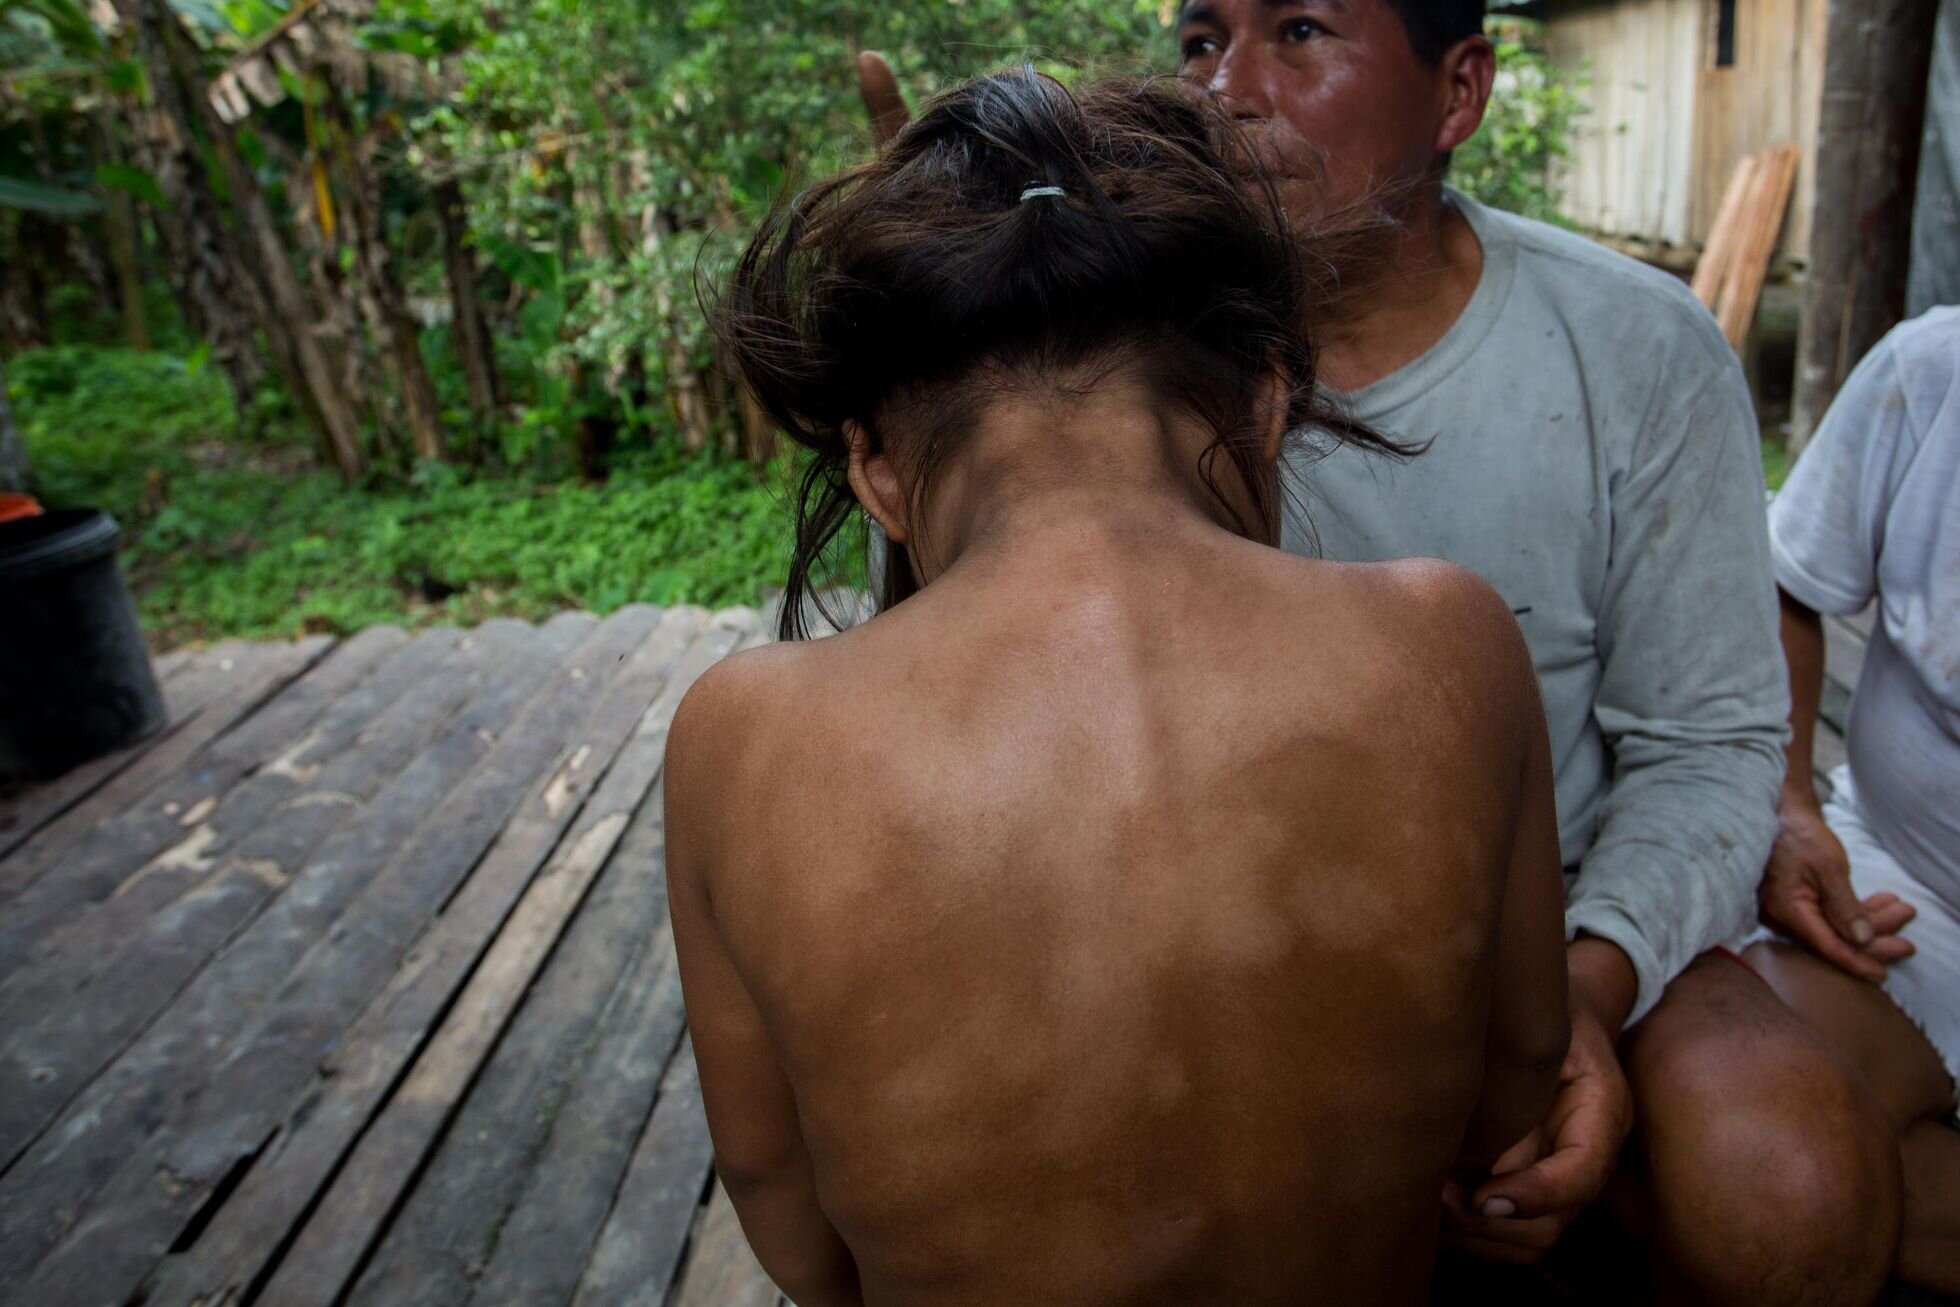 In the Sani Isla commune in the Orellana province, Damary Mayerli Grefa shows the skin problems that were caused by contact with water contaminated by the oil.IVAN CASTANEIRA / AGENCIA TEGANTAI